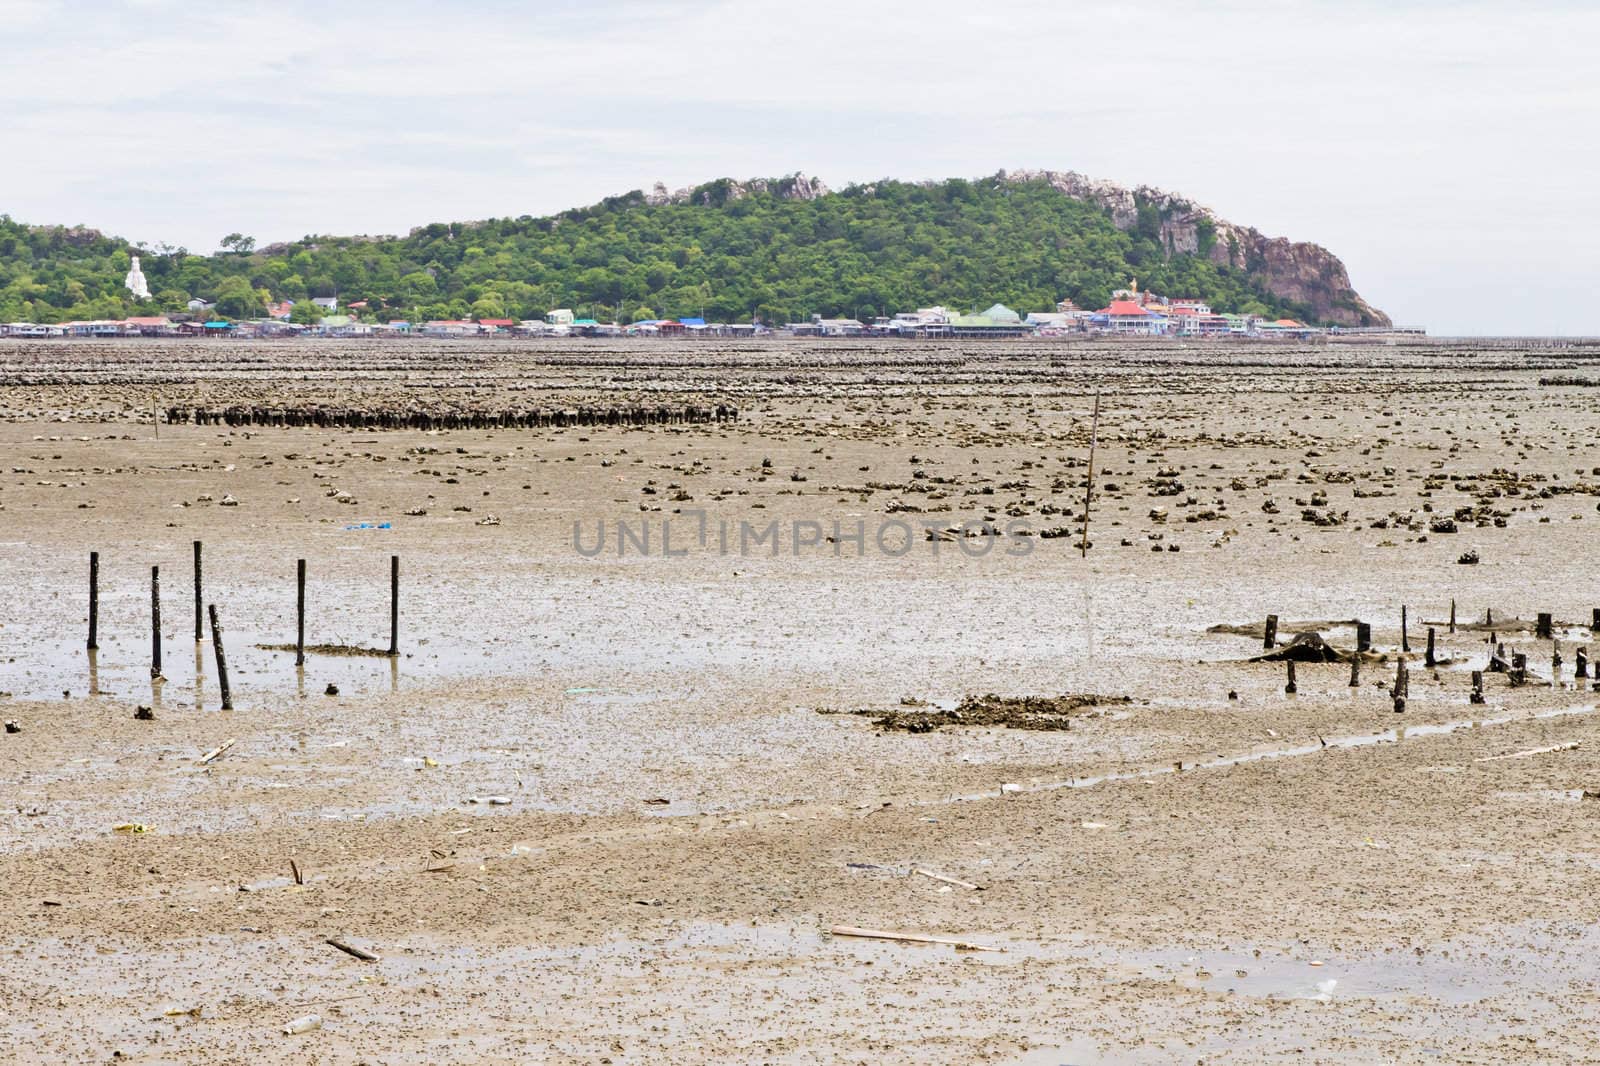 Beaches, rocky areas. The sea east of Thailand.